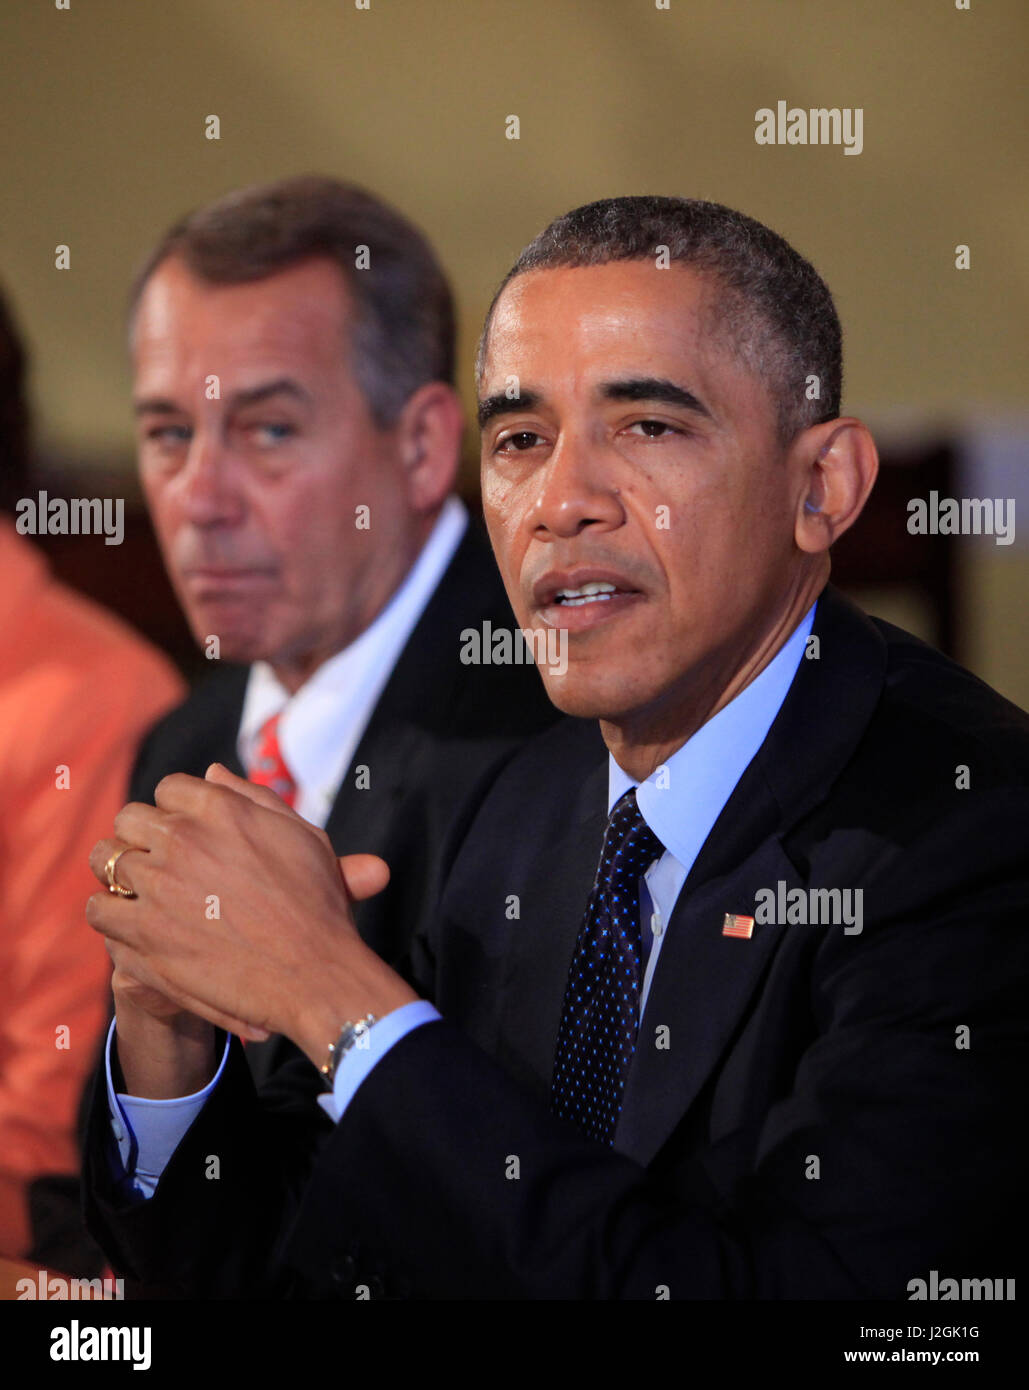 President Barack Obama meets with bipartisan congressional leadership in the Old Family Dining Room of the White House, November 7, 2014.(left to right: Speaker of the House John Boehner, President Obama) Stock Photo